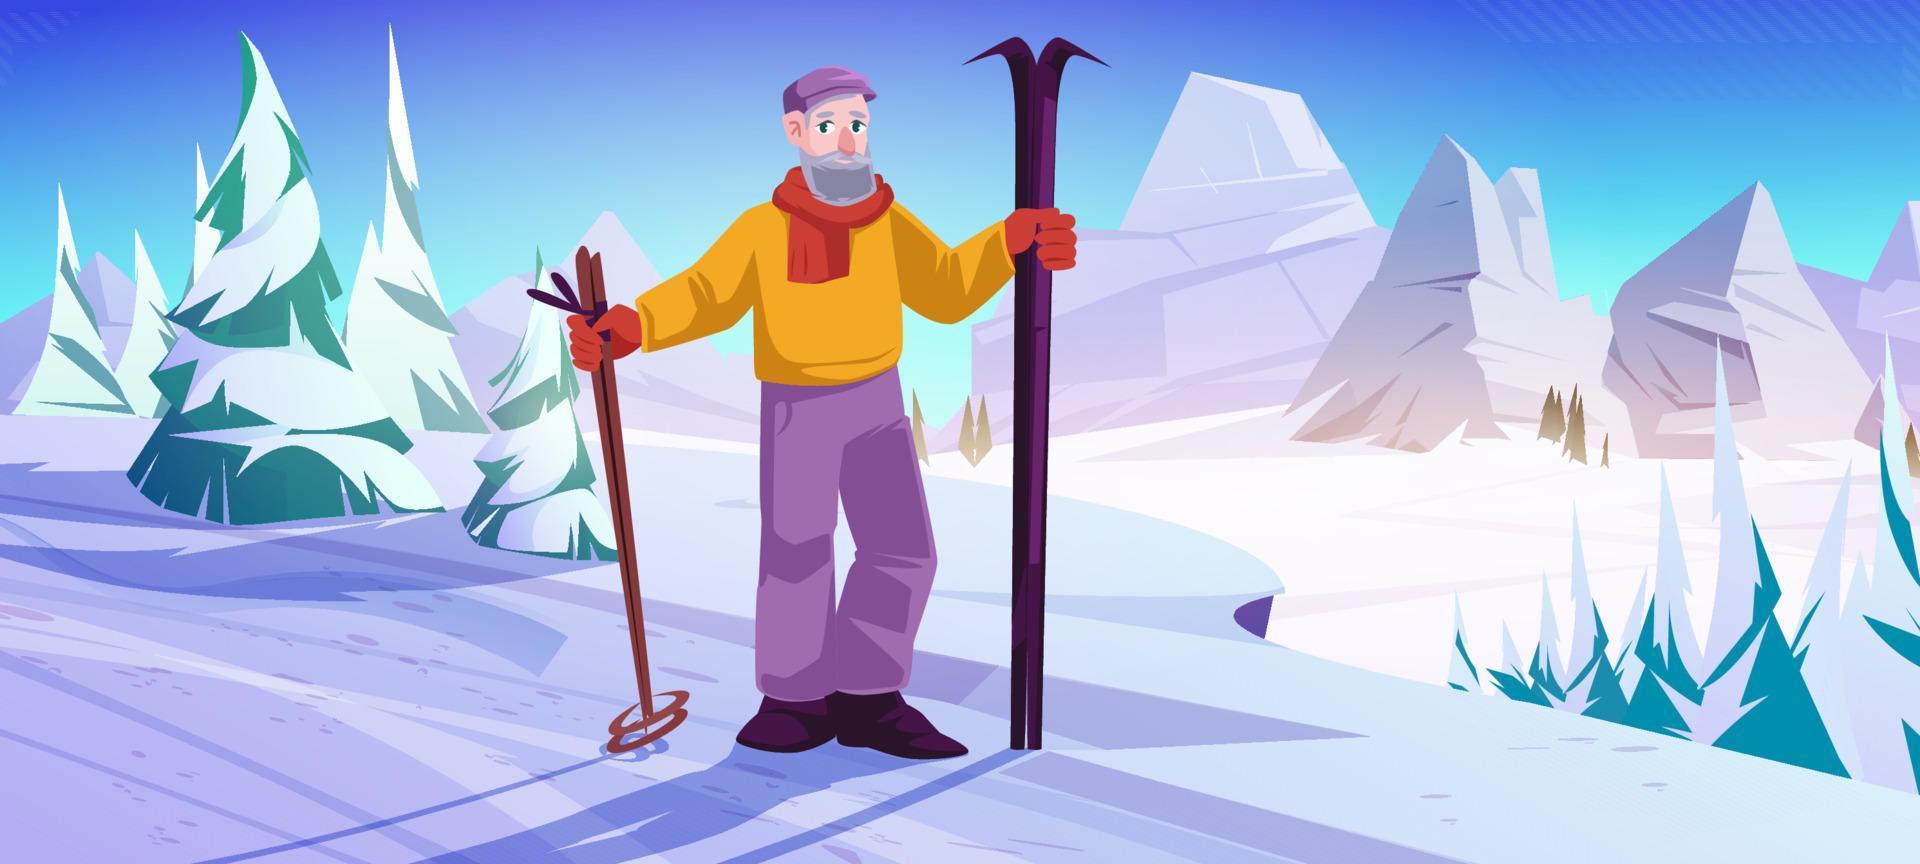 Elder man with ski and sticks stand on snow slope vector